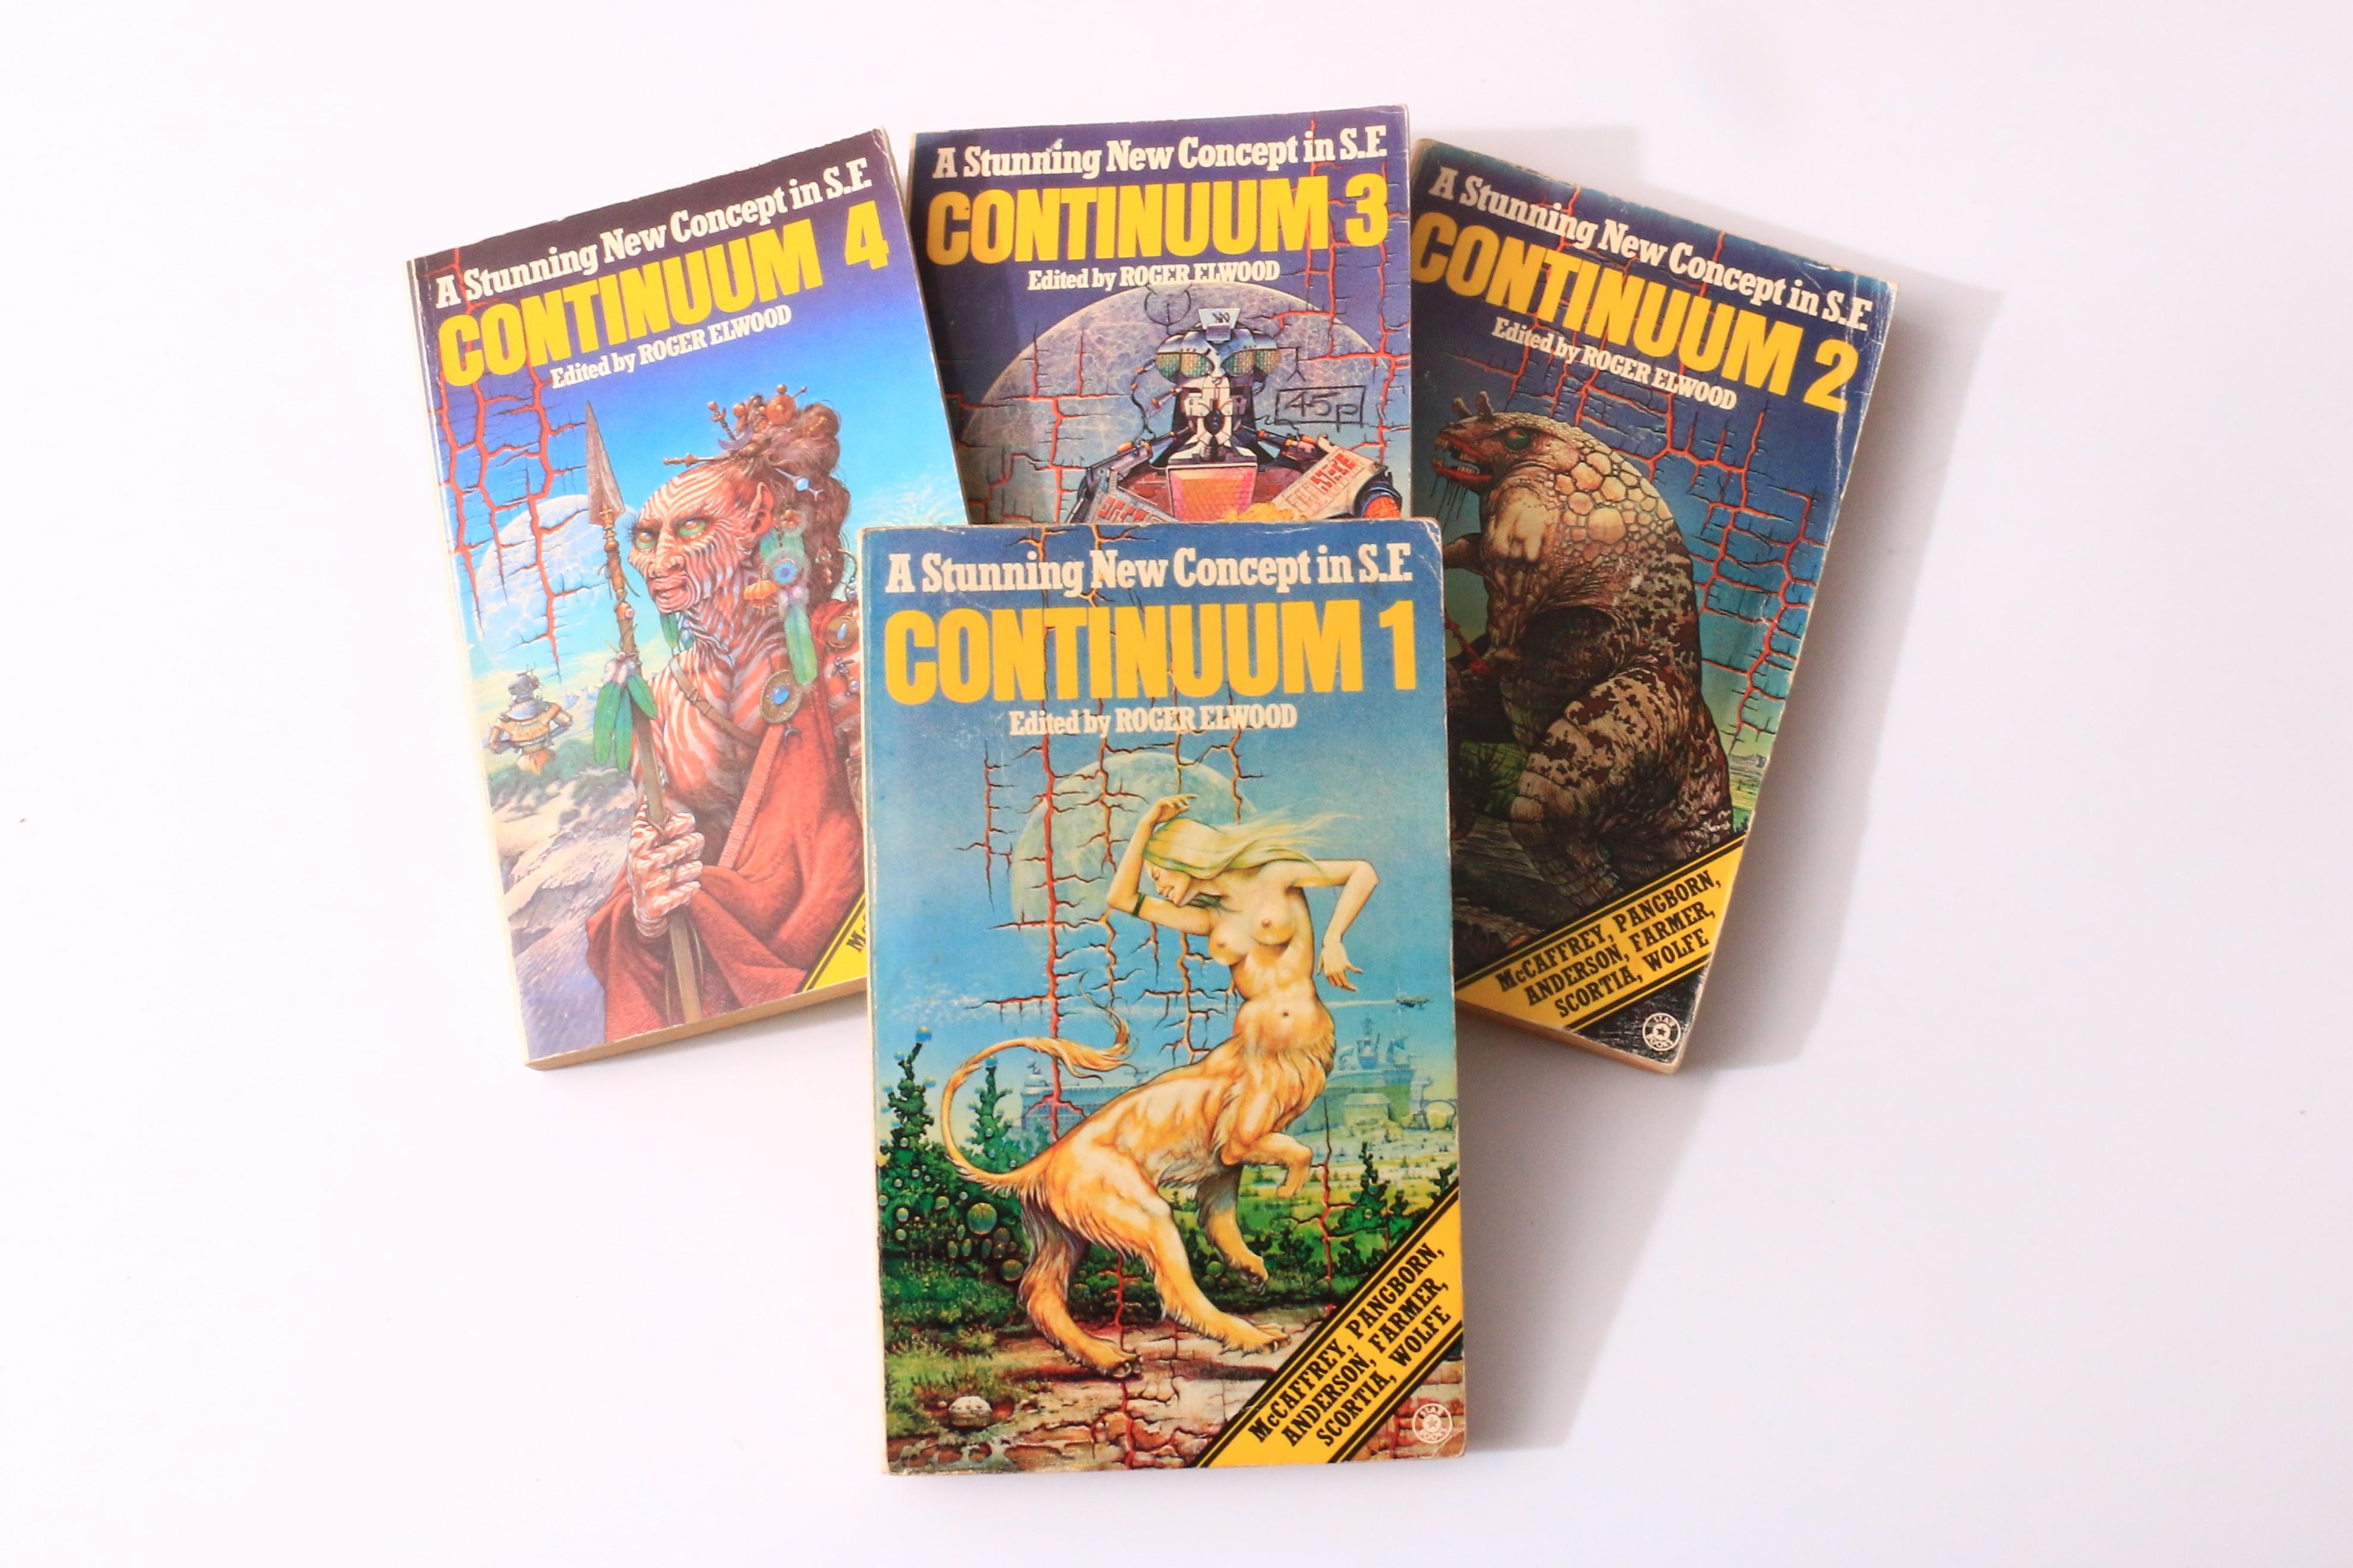 Roger Elwood [ed] - Continuum 1 - 4 - Star Books, 1977, First Edition.